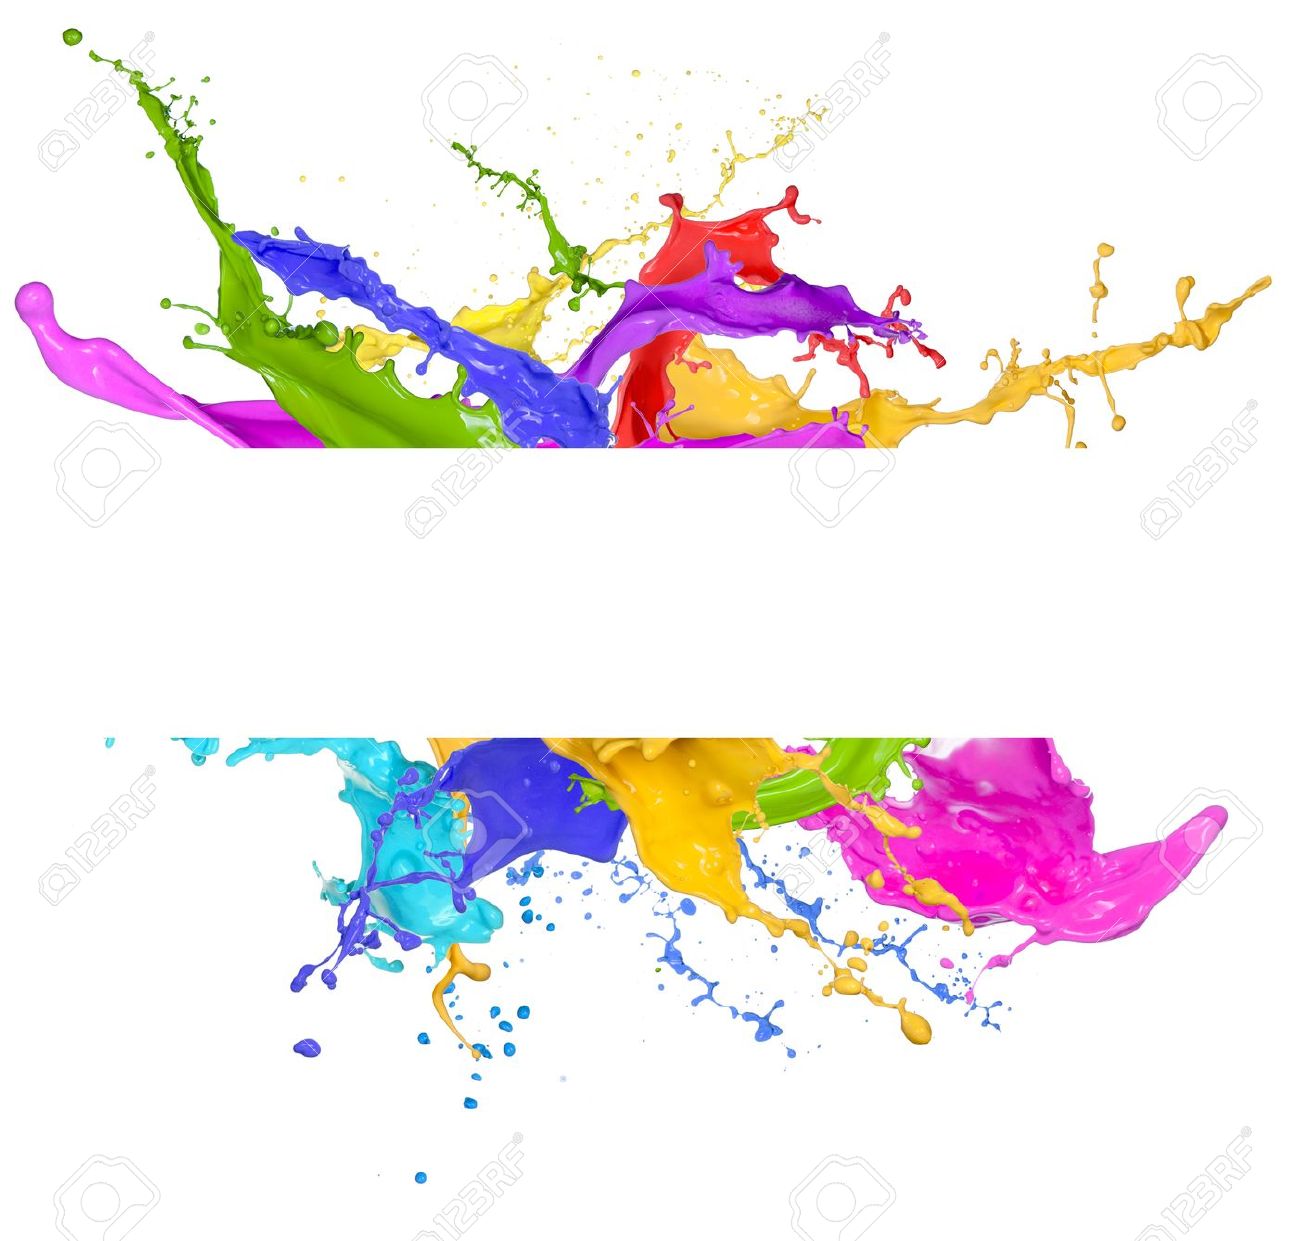 Free download Colored Splashes In Abstract Shape Isolated On White